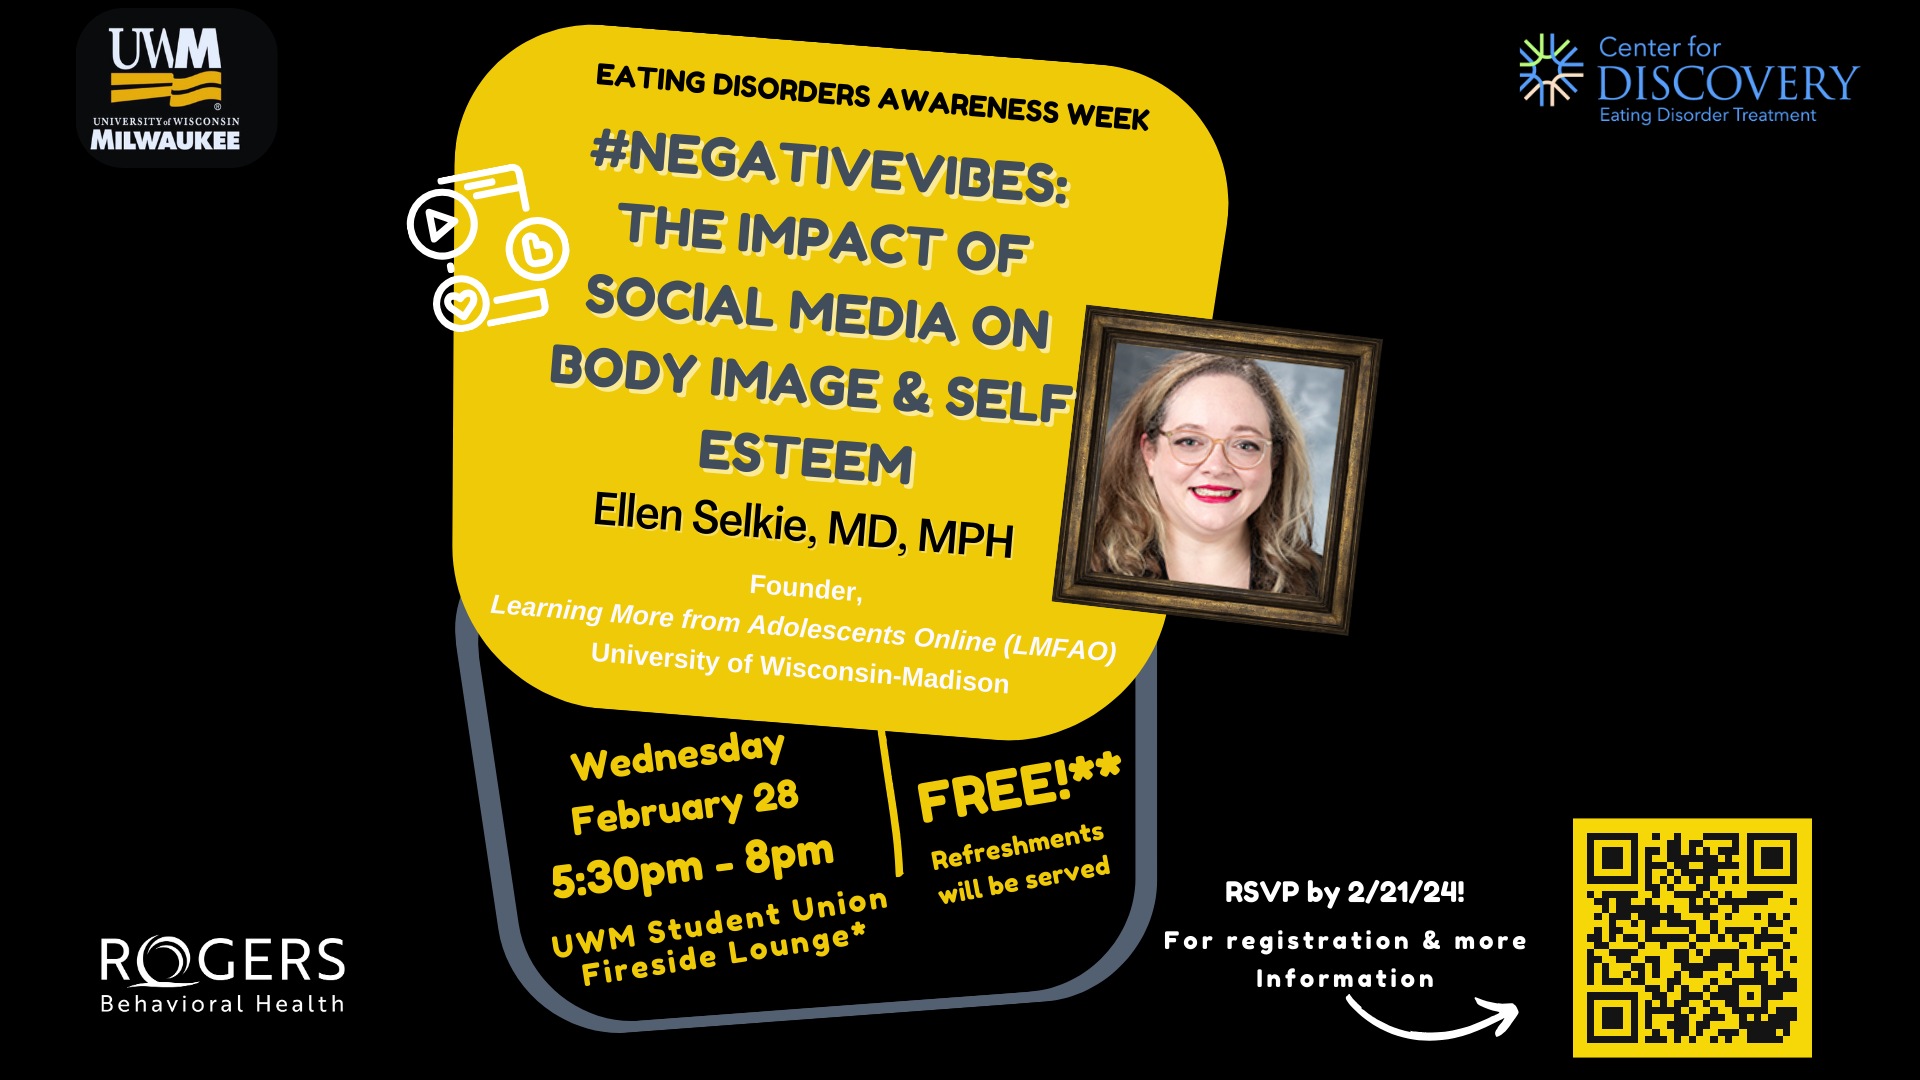 A graphic for a seminar about the impact of social media on body image on February 28 in the Union